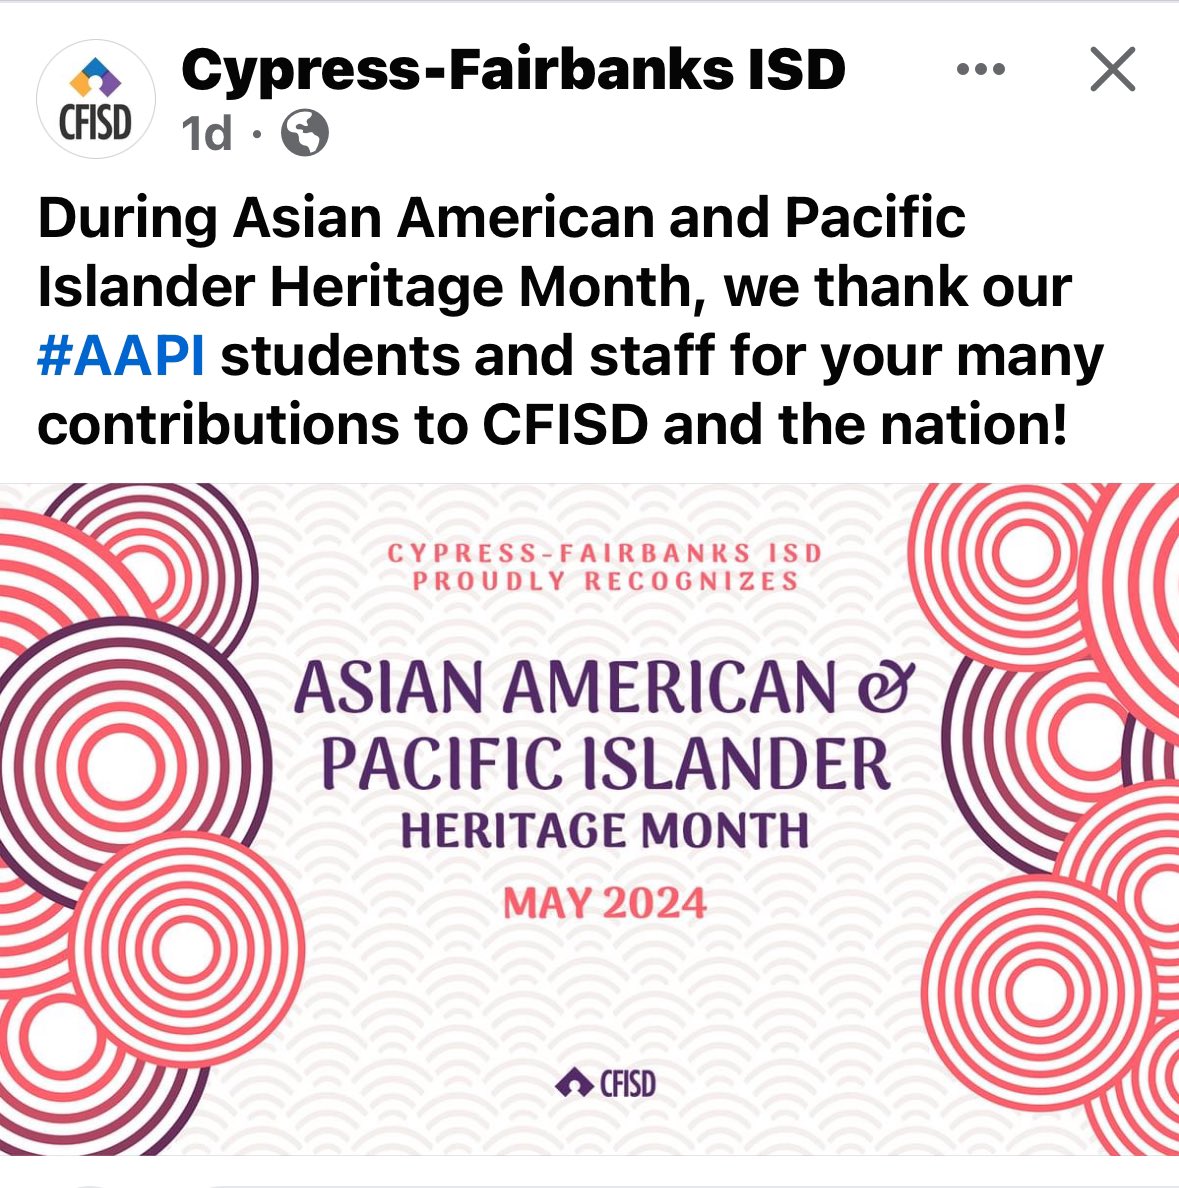 We celebrate you! #AAPI Opportunity and love for all. @CFISD_Hancock